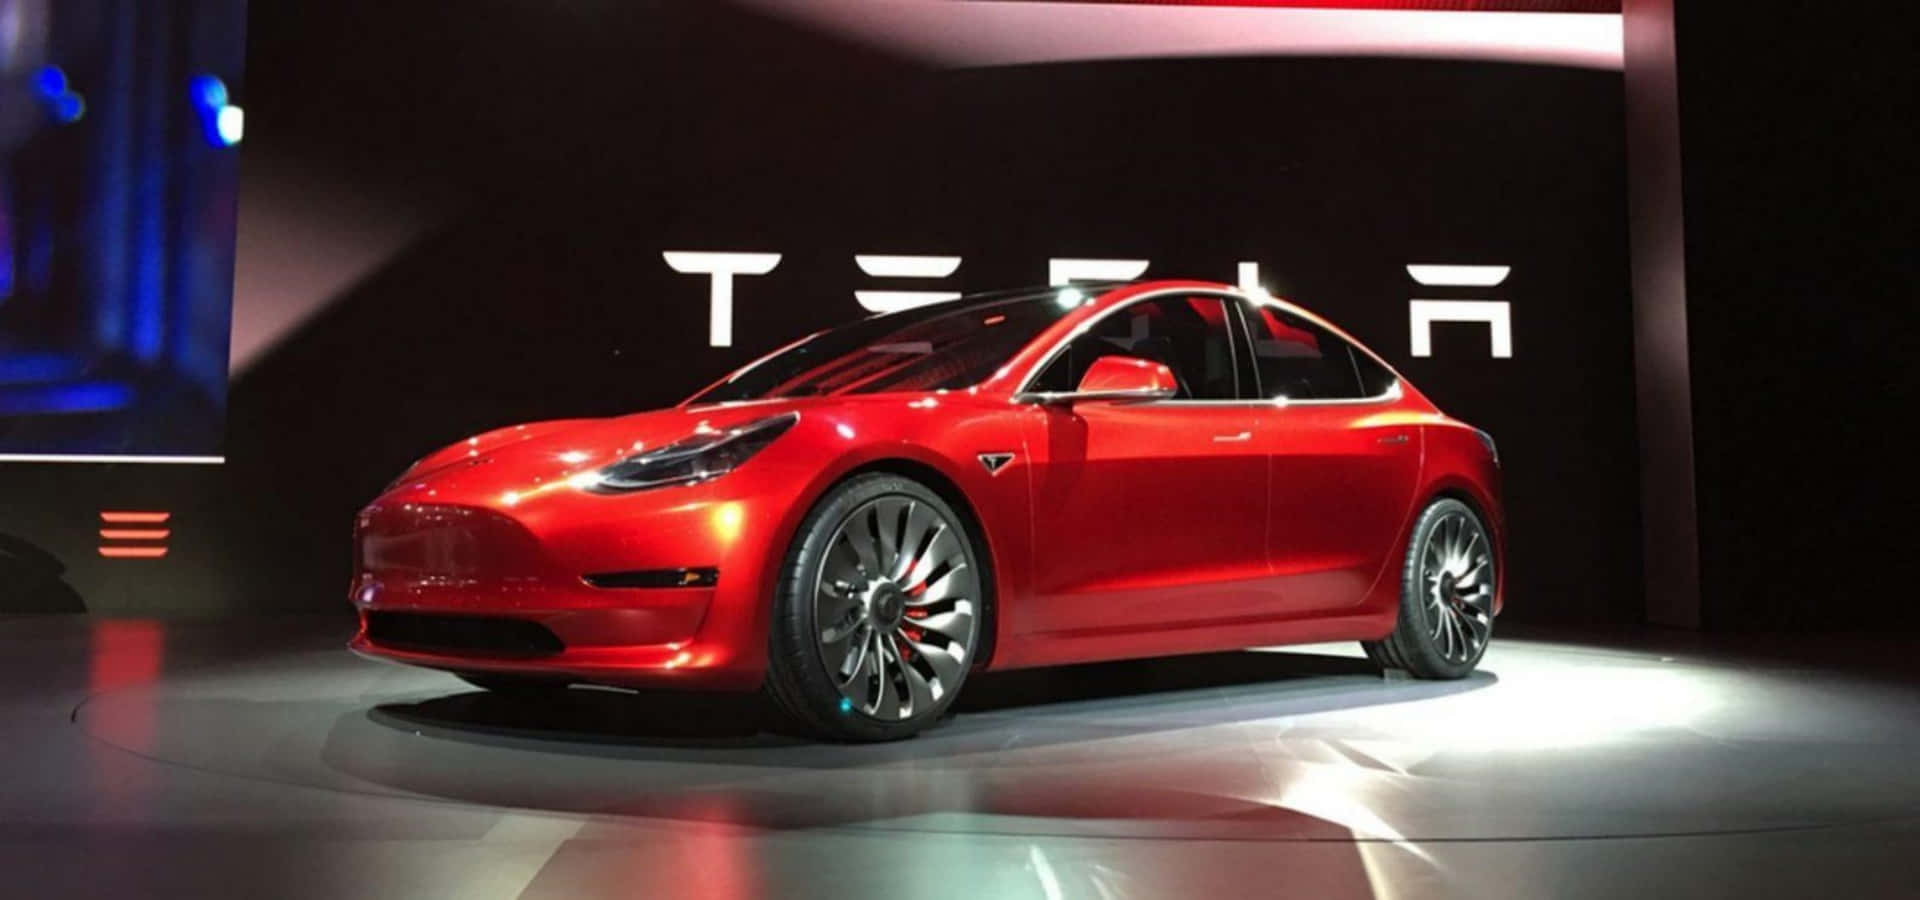 Tesla Model 3 – Going Beyond The Expected